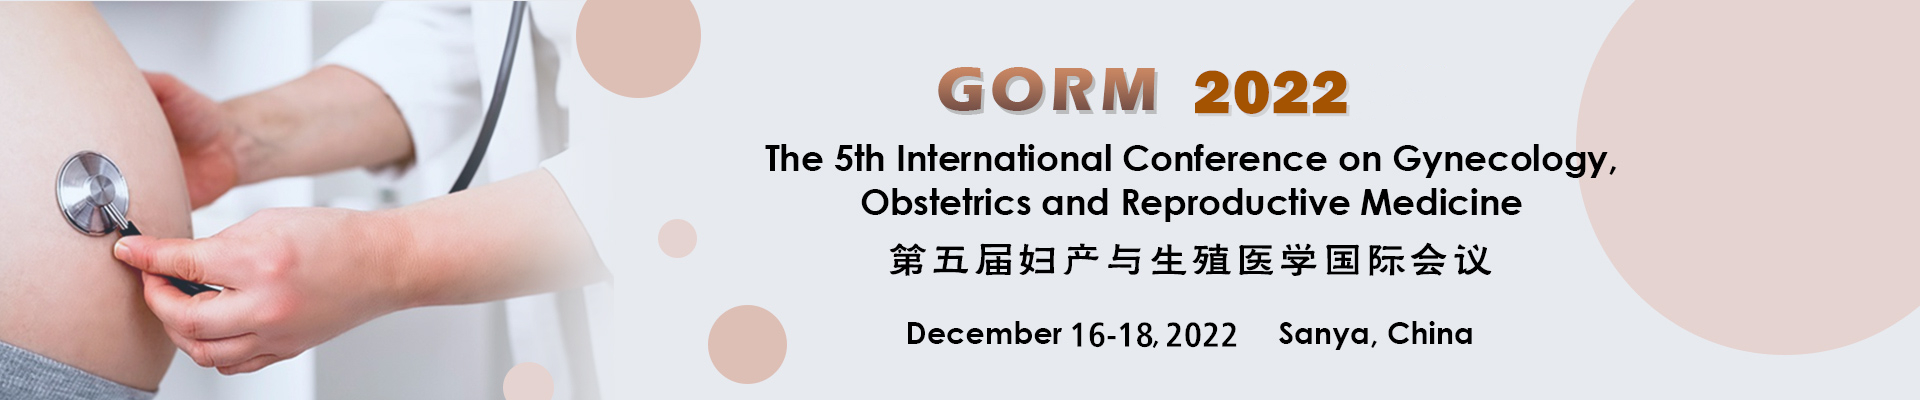 The 5th Int'l Conference on Gynecology, Obstetrics and Reproductive Medicine (GORM 2022)